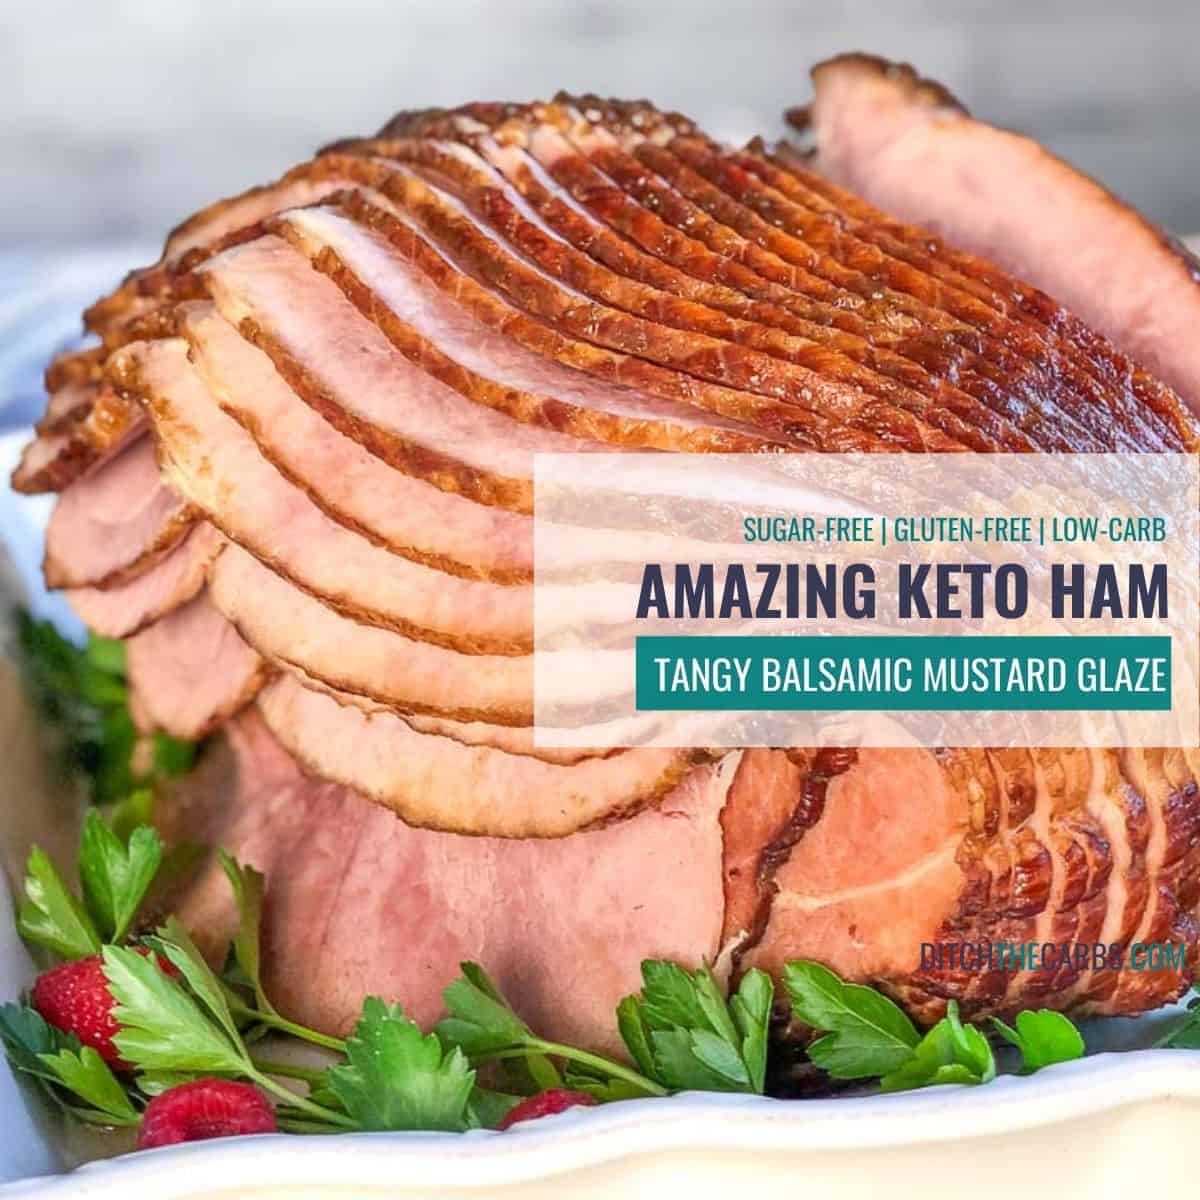 Melt In Your Mouth Keto Ham With Tangy Balsamic Mustard Glaze!